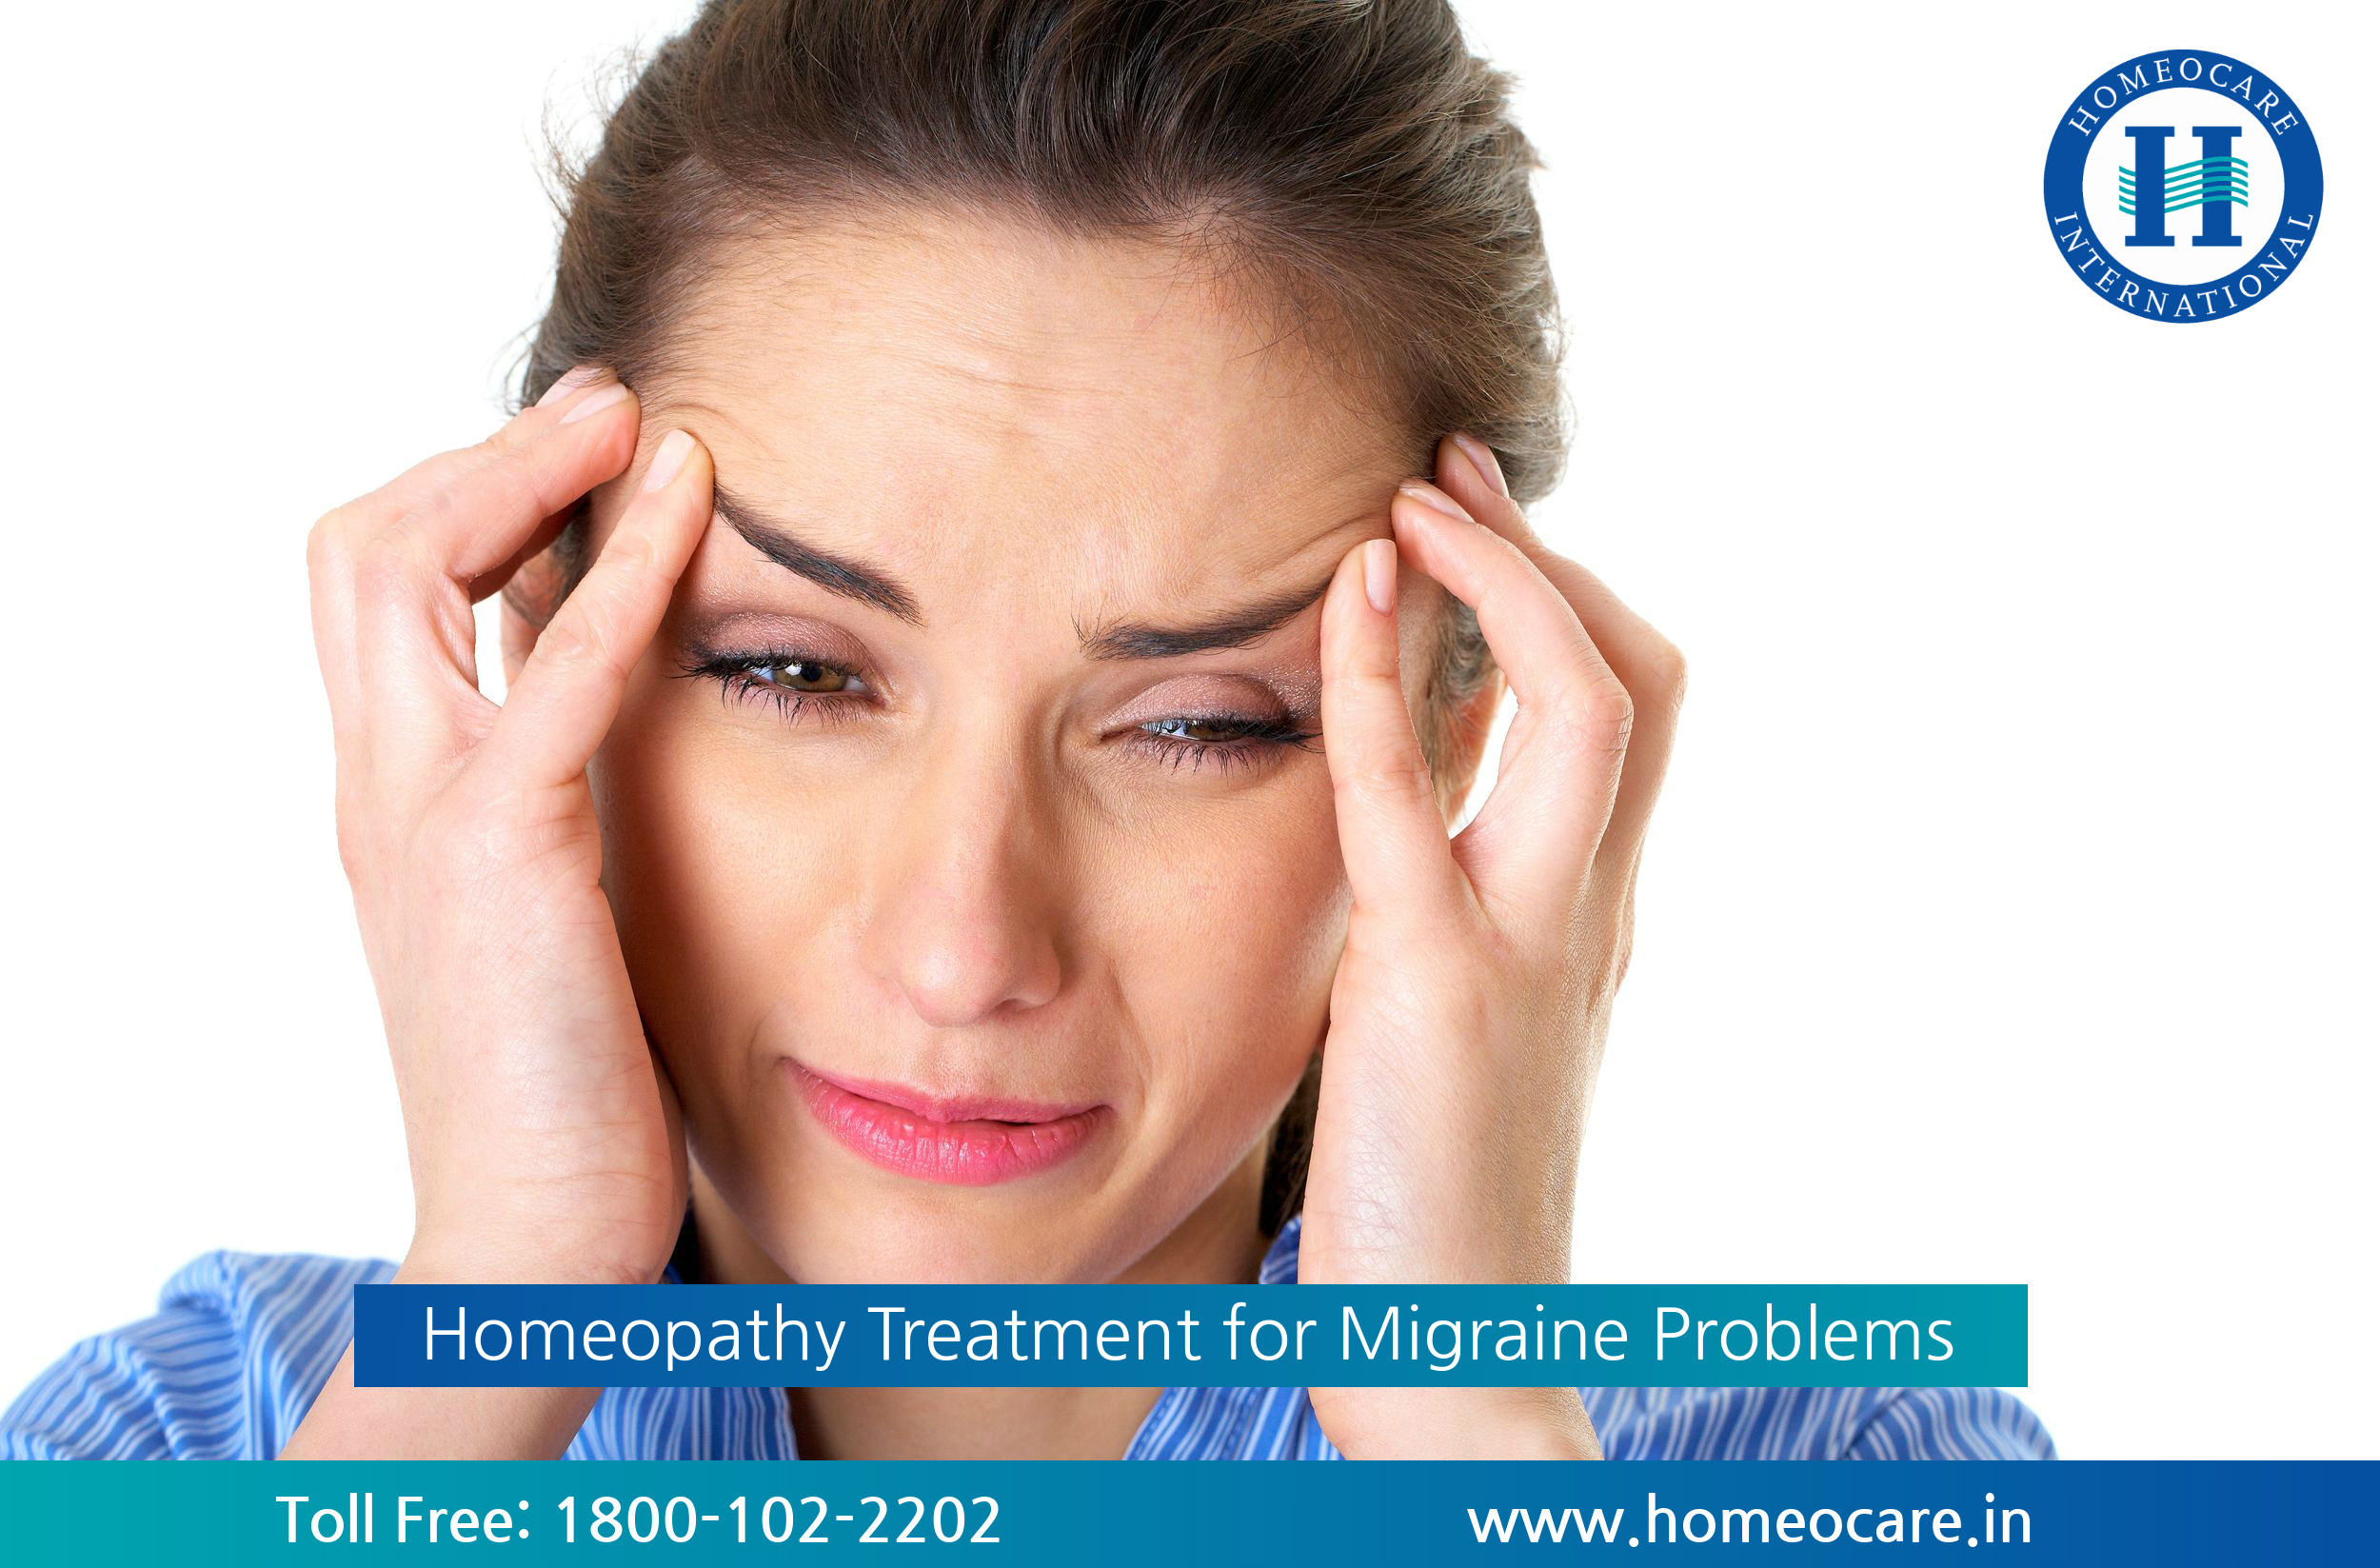 Homeopathy Treatment for Migraine | Migraine Treatment in Homeopathy - Homeocare International